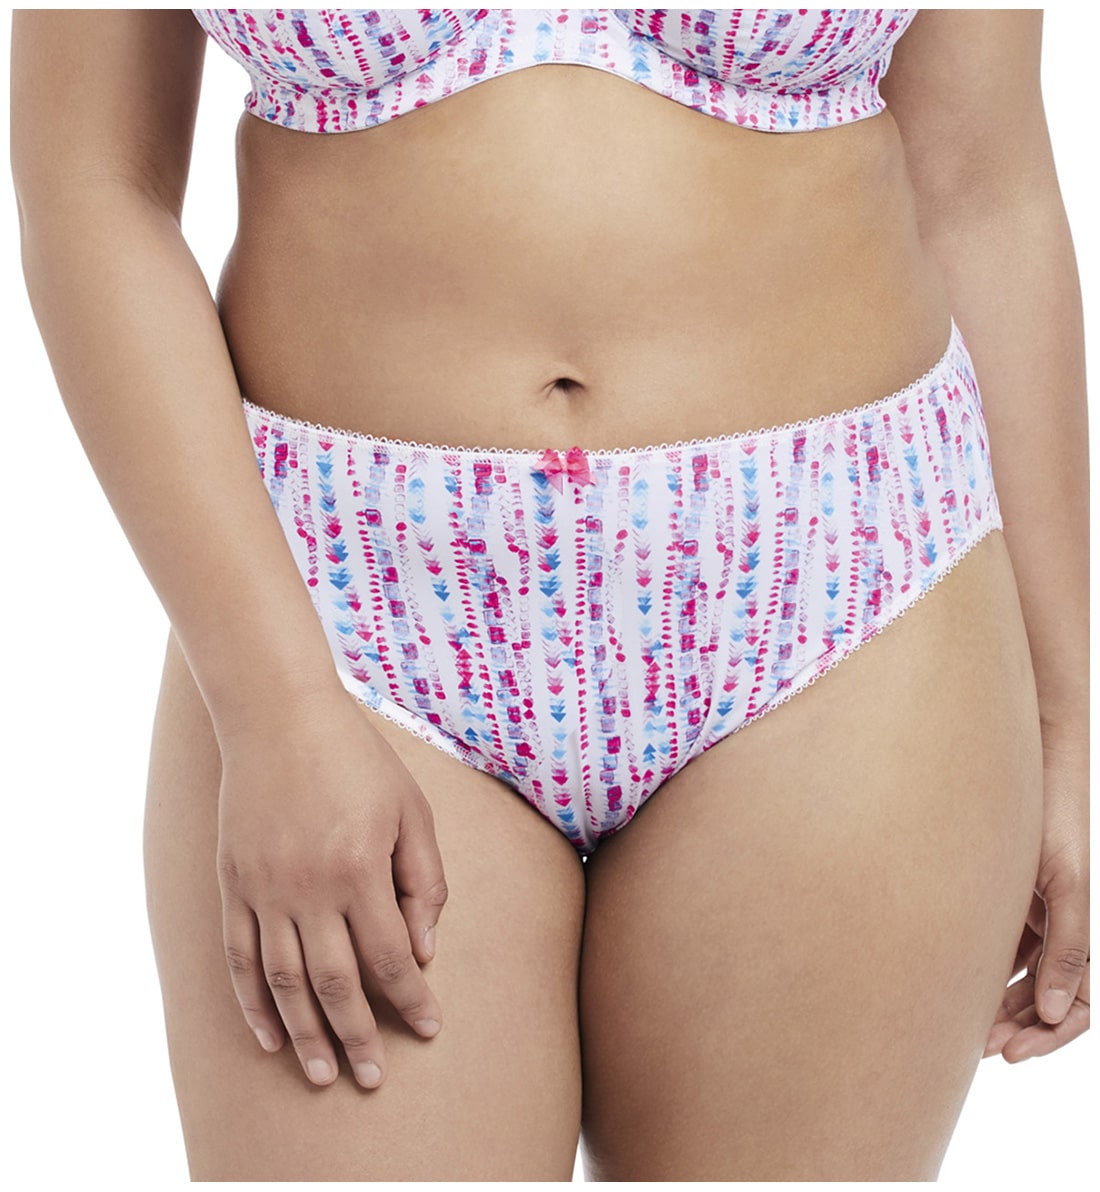 Elomi Kim Matching Panty Brief (4345),Large,Pizzazz - Pizzazz,Large